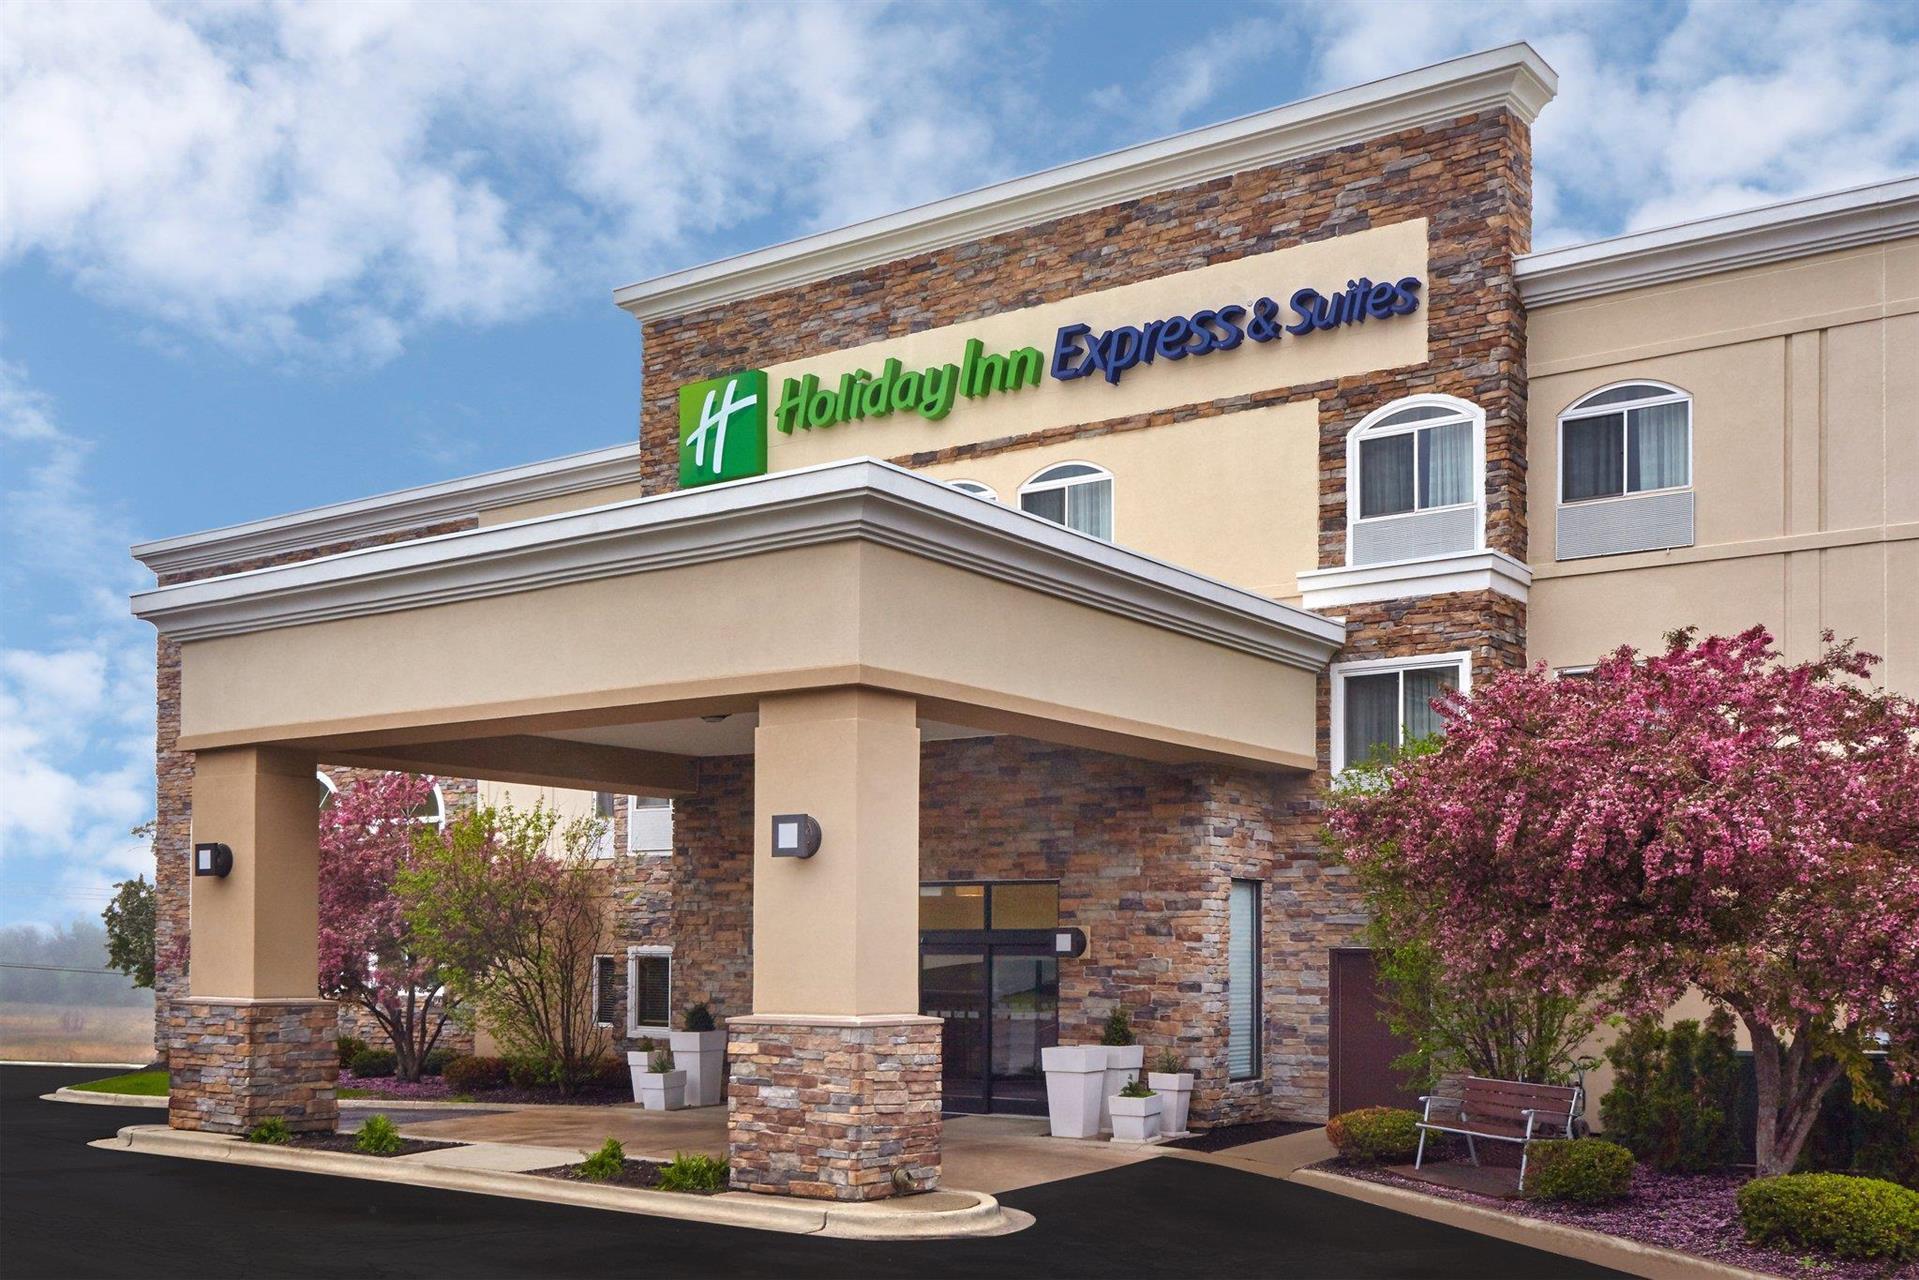 Holiday Inn Express & Suites Chicago-Libertyville in Libertyville, IL